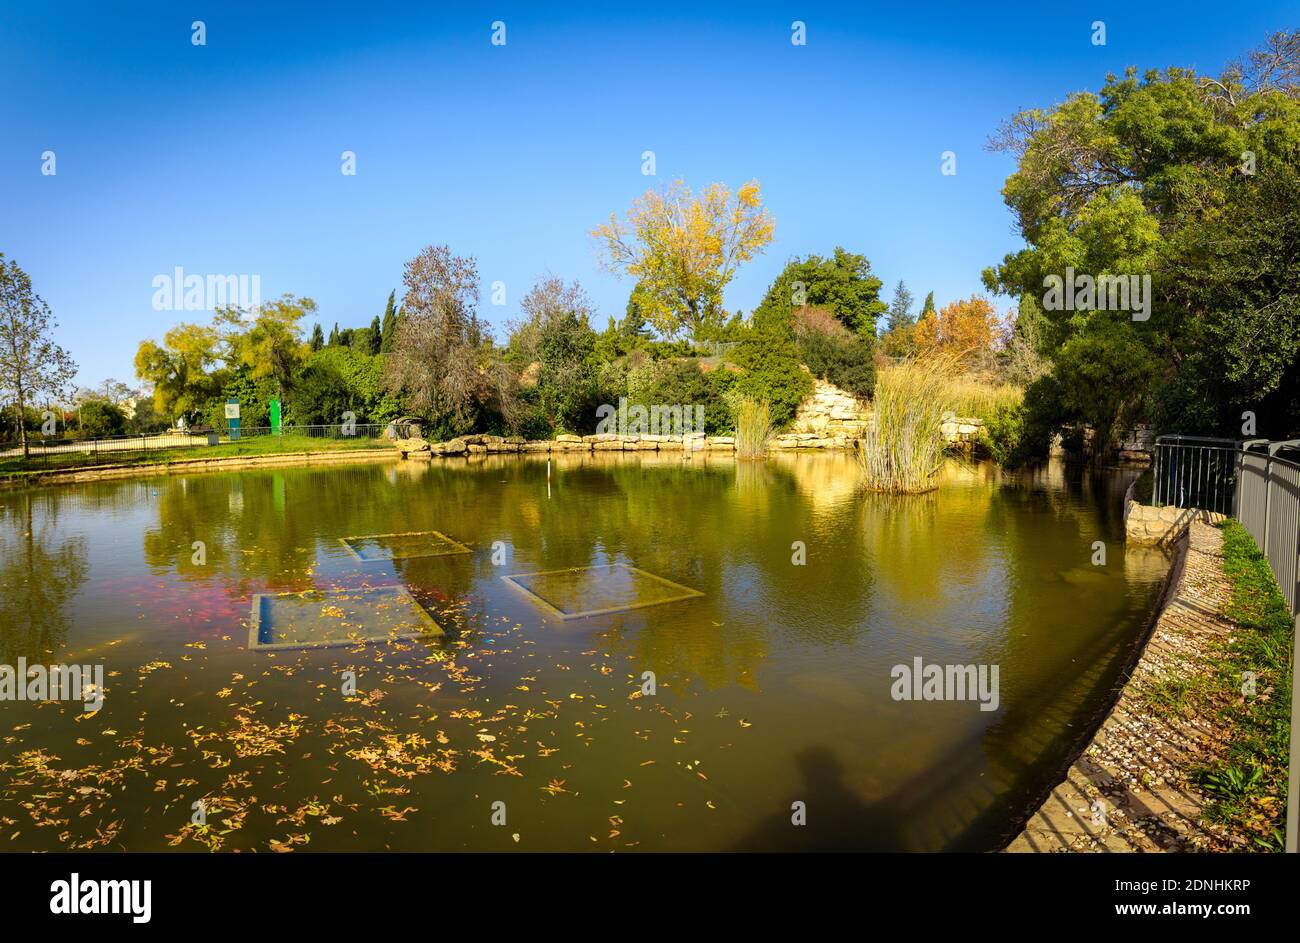 Panoramic image of the artificial lake in the middle of The Wohl Rose Park (Hebrew: Gan HaVradim) in Givat Ram, Jerusalem, Israel Stock Photo